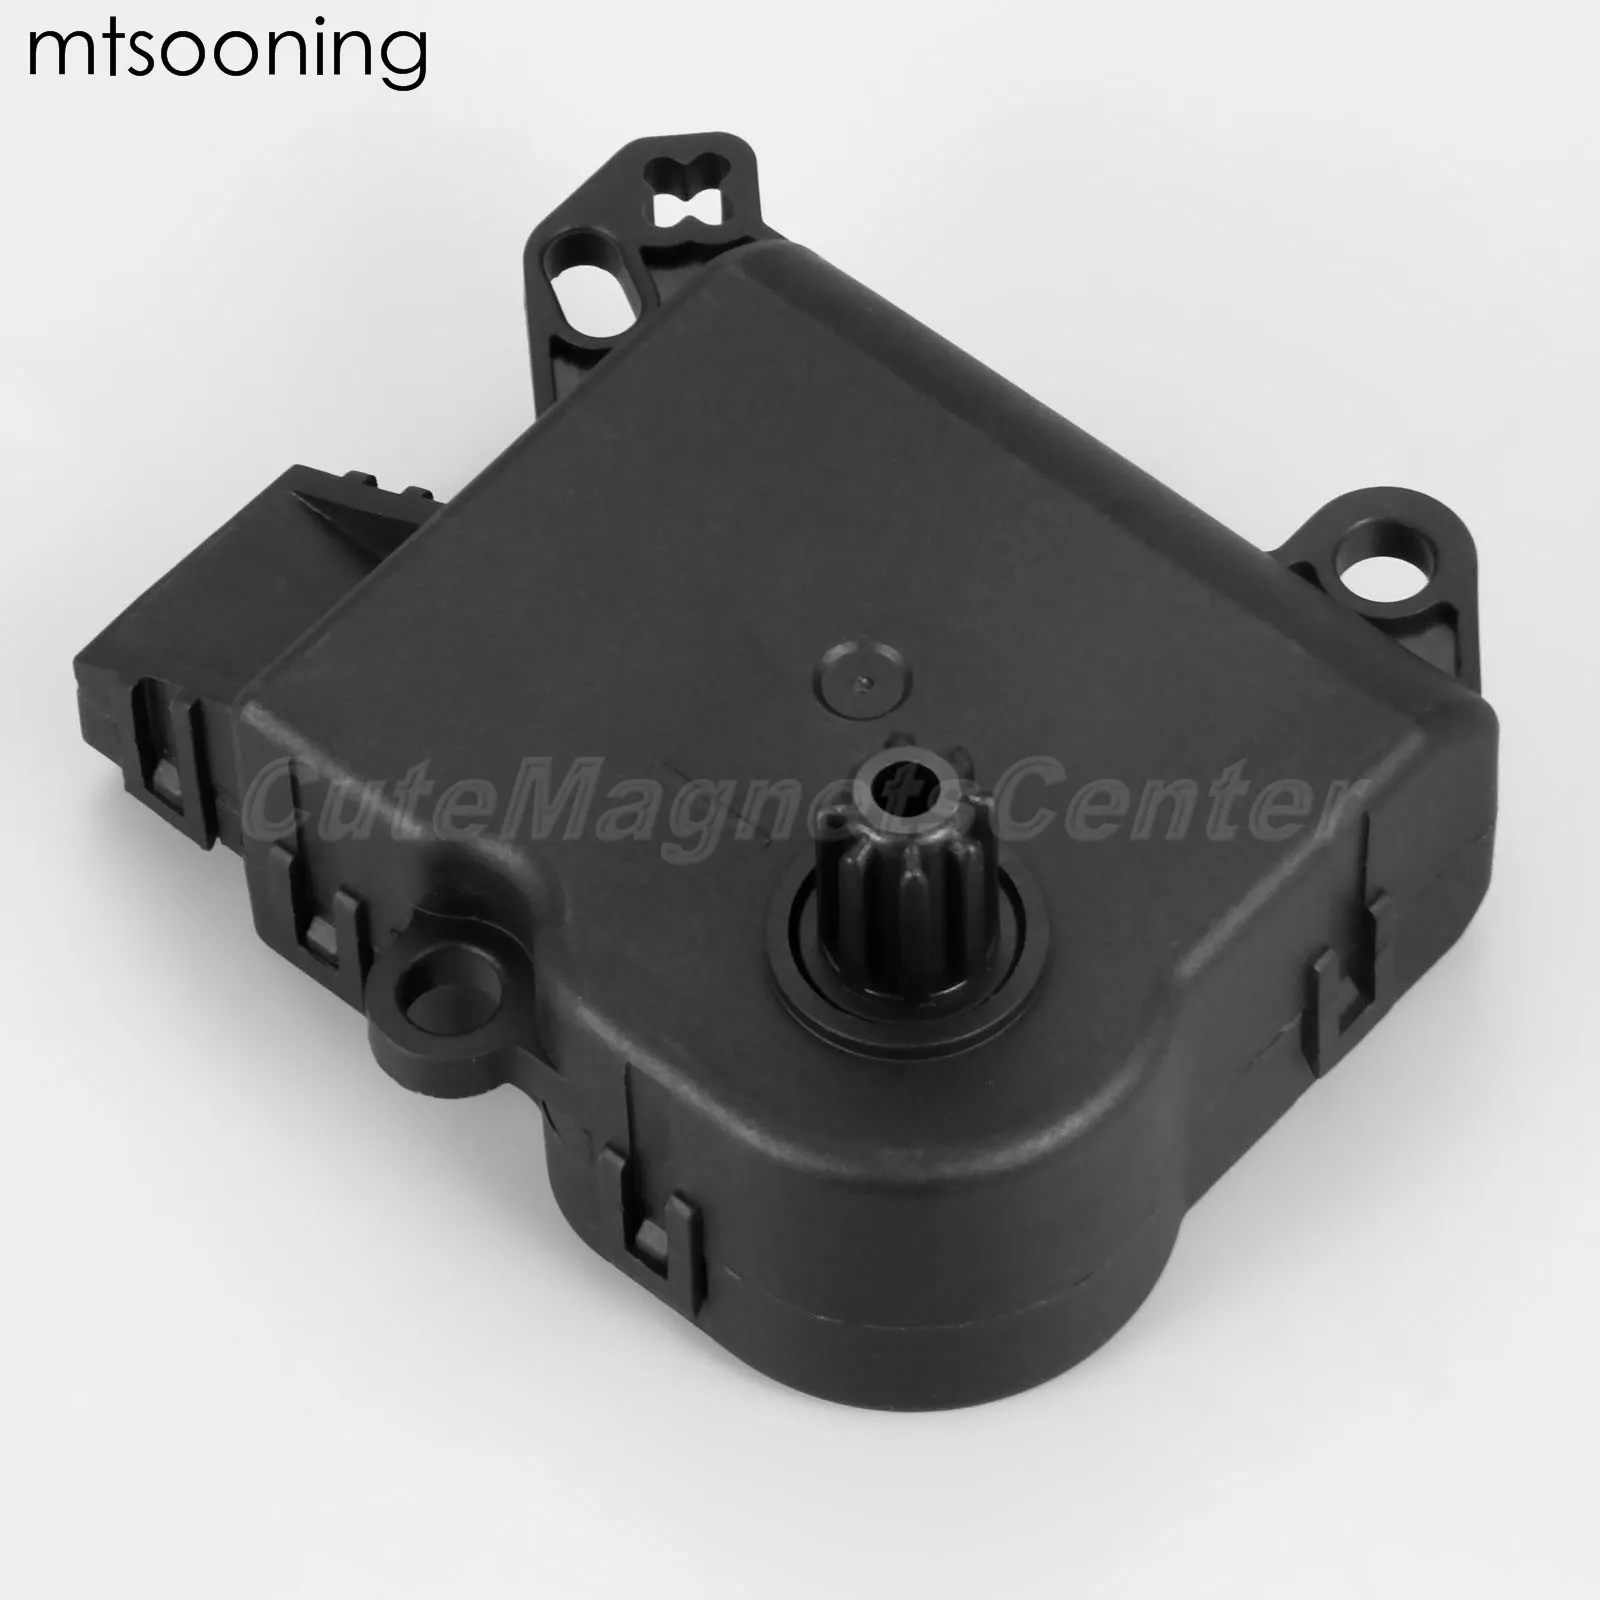 mtsooning-HVAC-A-C-Air-Blend-Door-Actuator-AA5Z19E616C-604-234-For-Lincoln-MKS-MKT-Ford.jpg